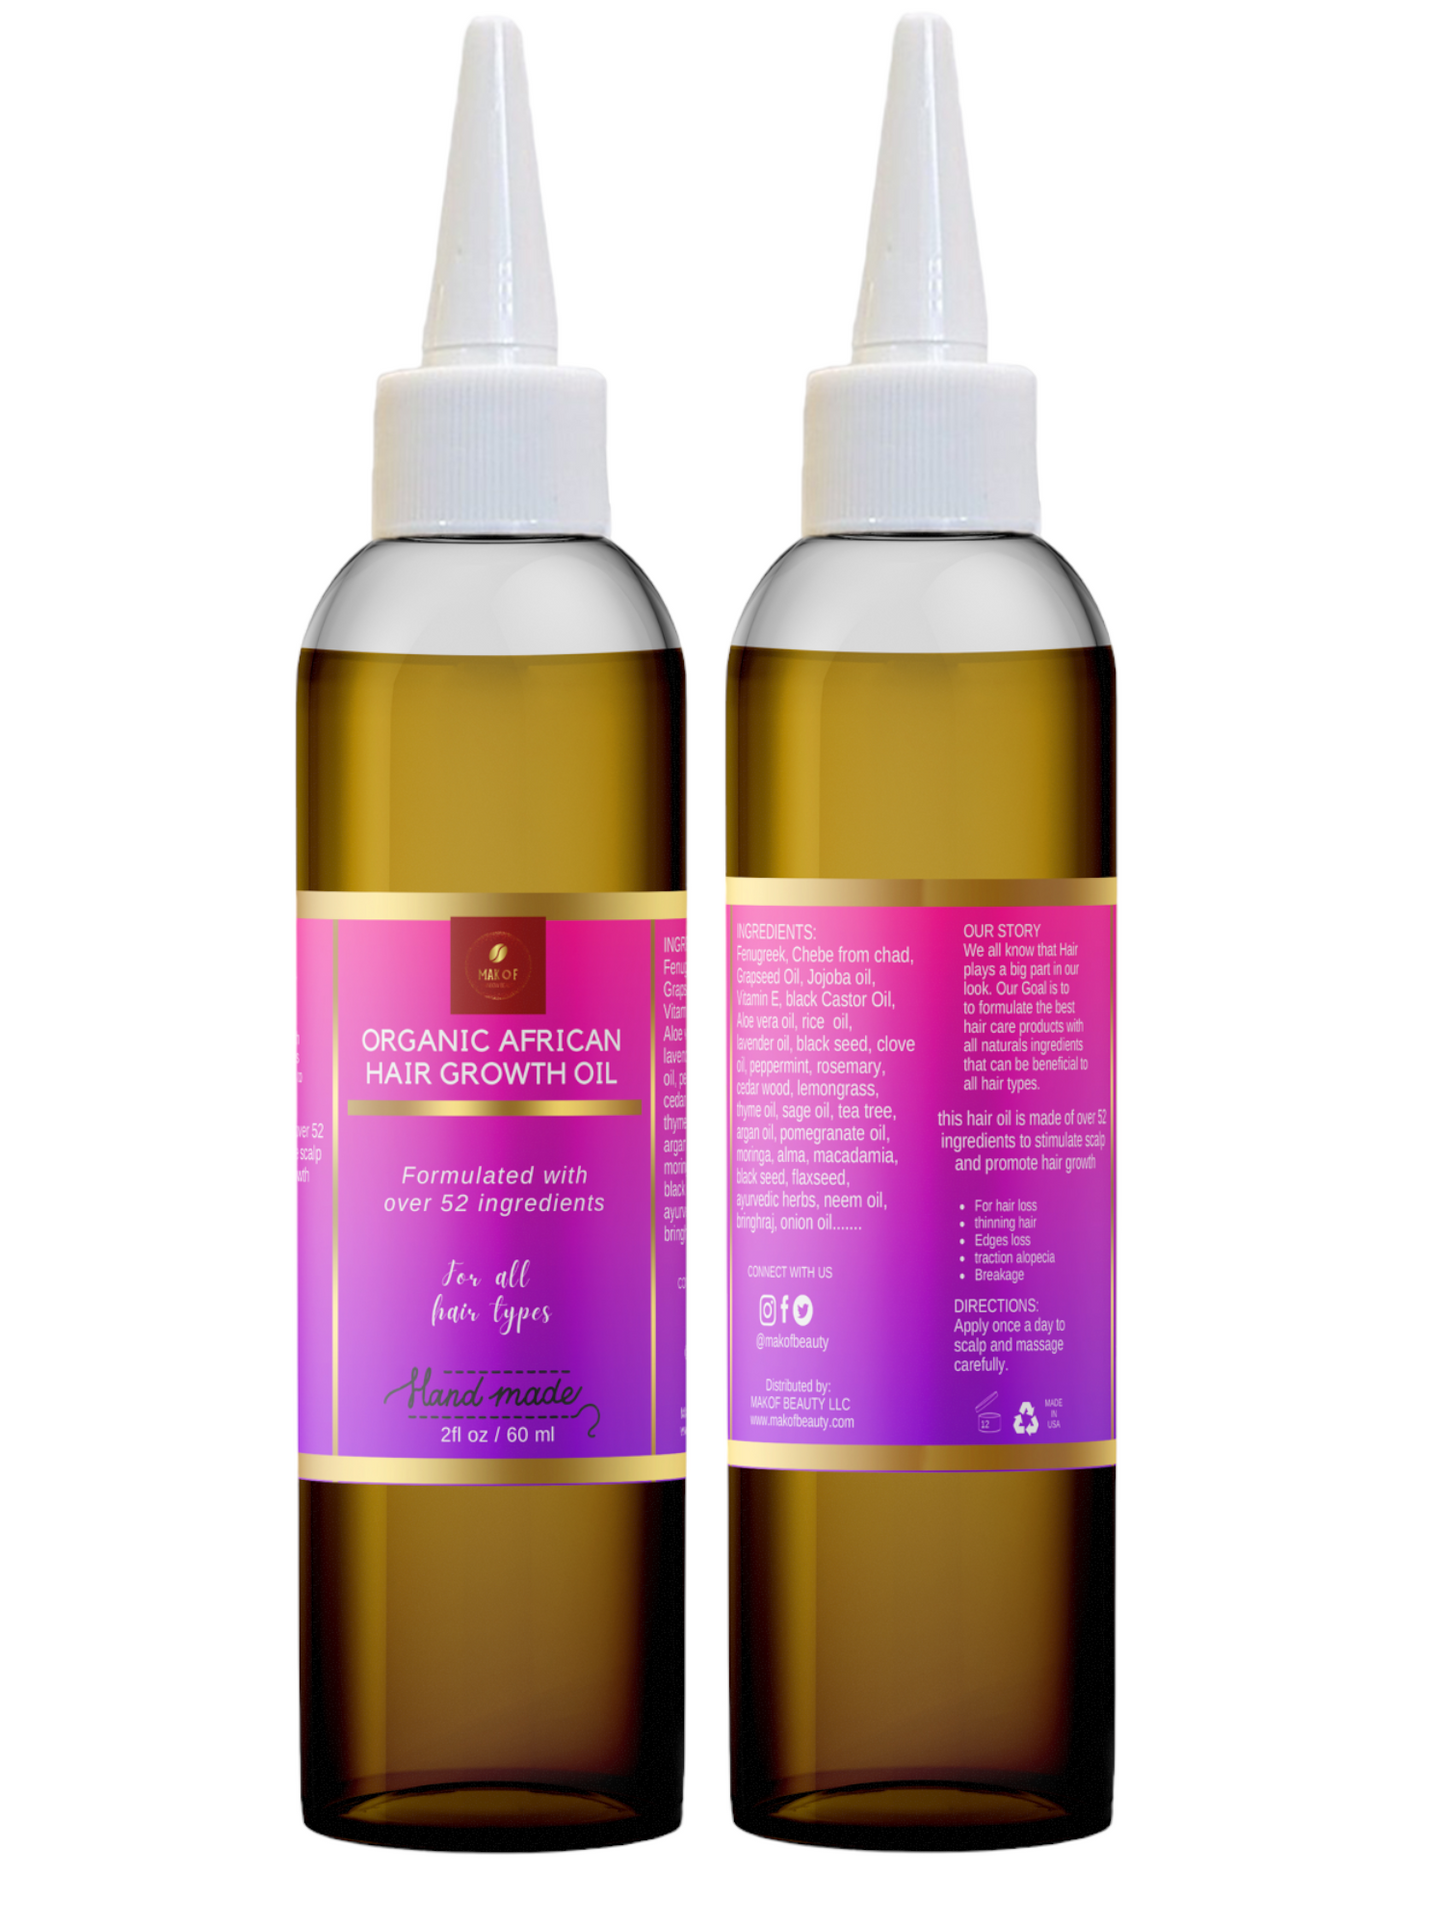 HERBAL / CHEBE HAIR GROWTH OIL MIX